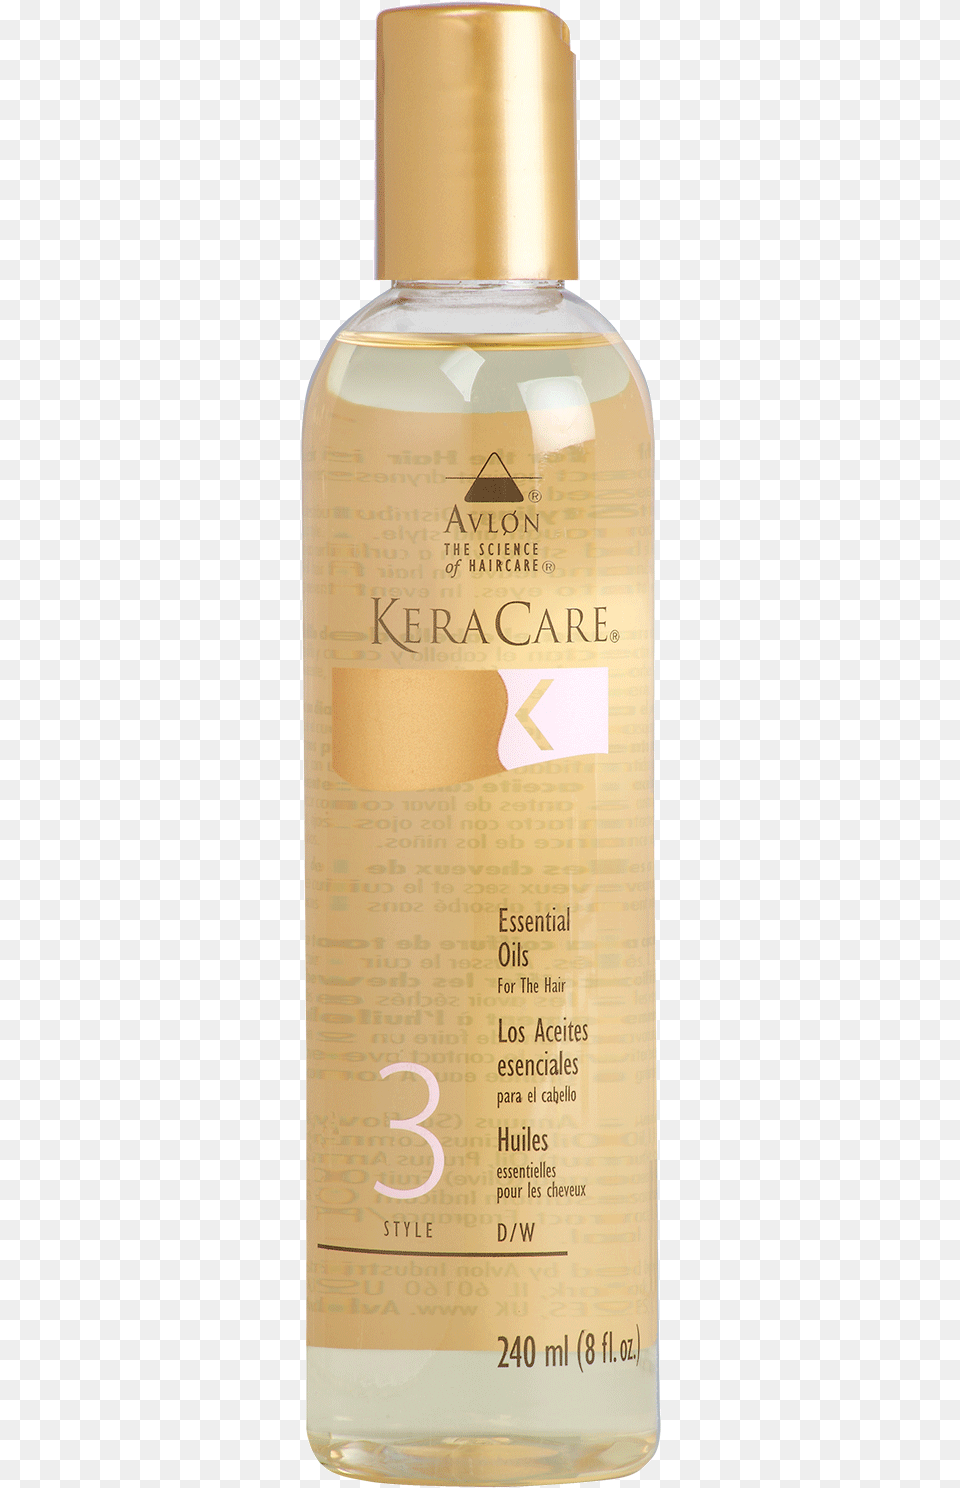 Keracare Essential Oils For The Hair Keracare Huile Essentielle, Bottle, Cosmetics, Perfume, Lotion Png Image